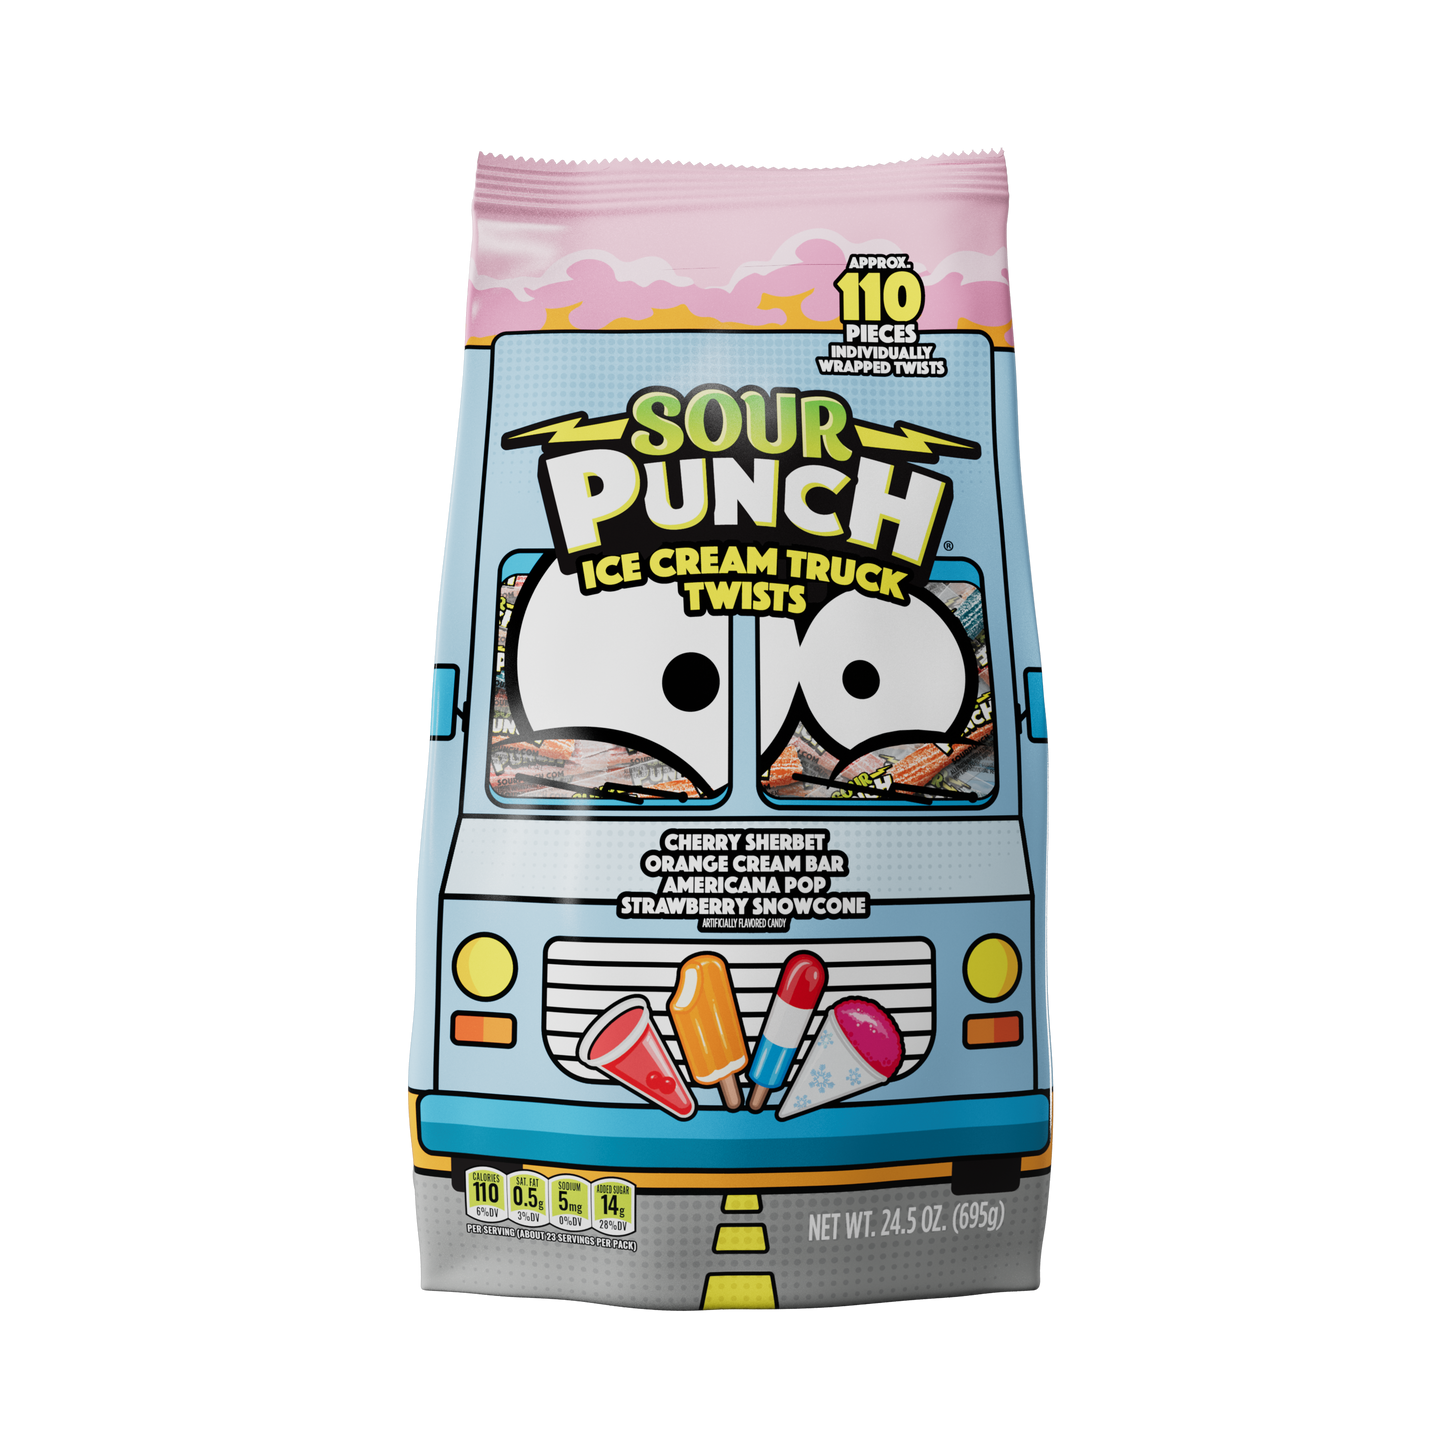 SOUR PUNCH Ice Cream Truck Twists ice cream candy - Front of Pack